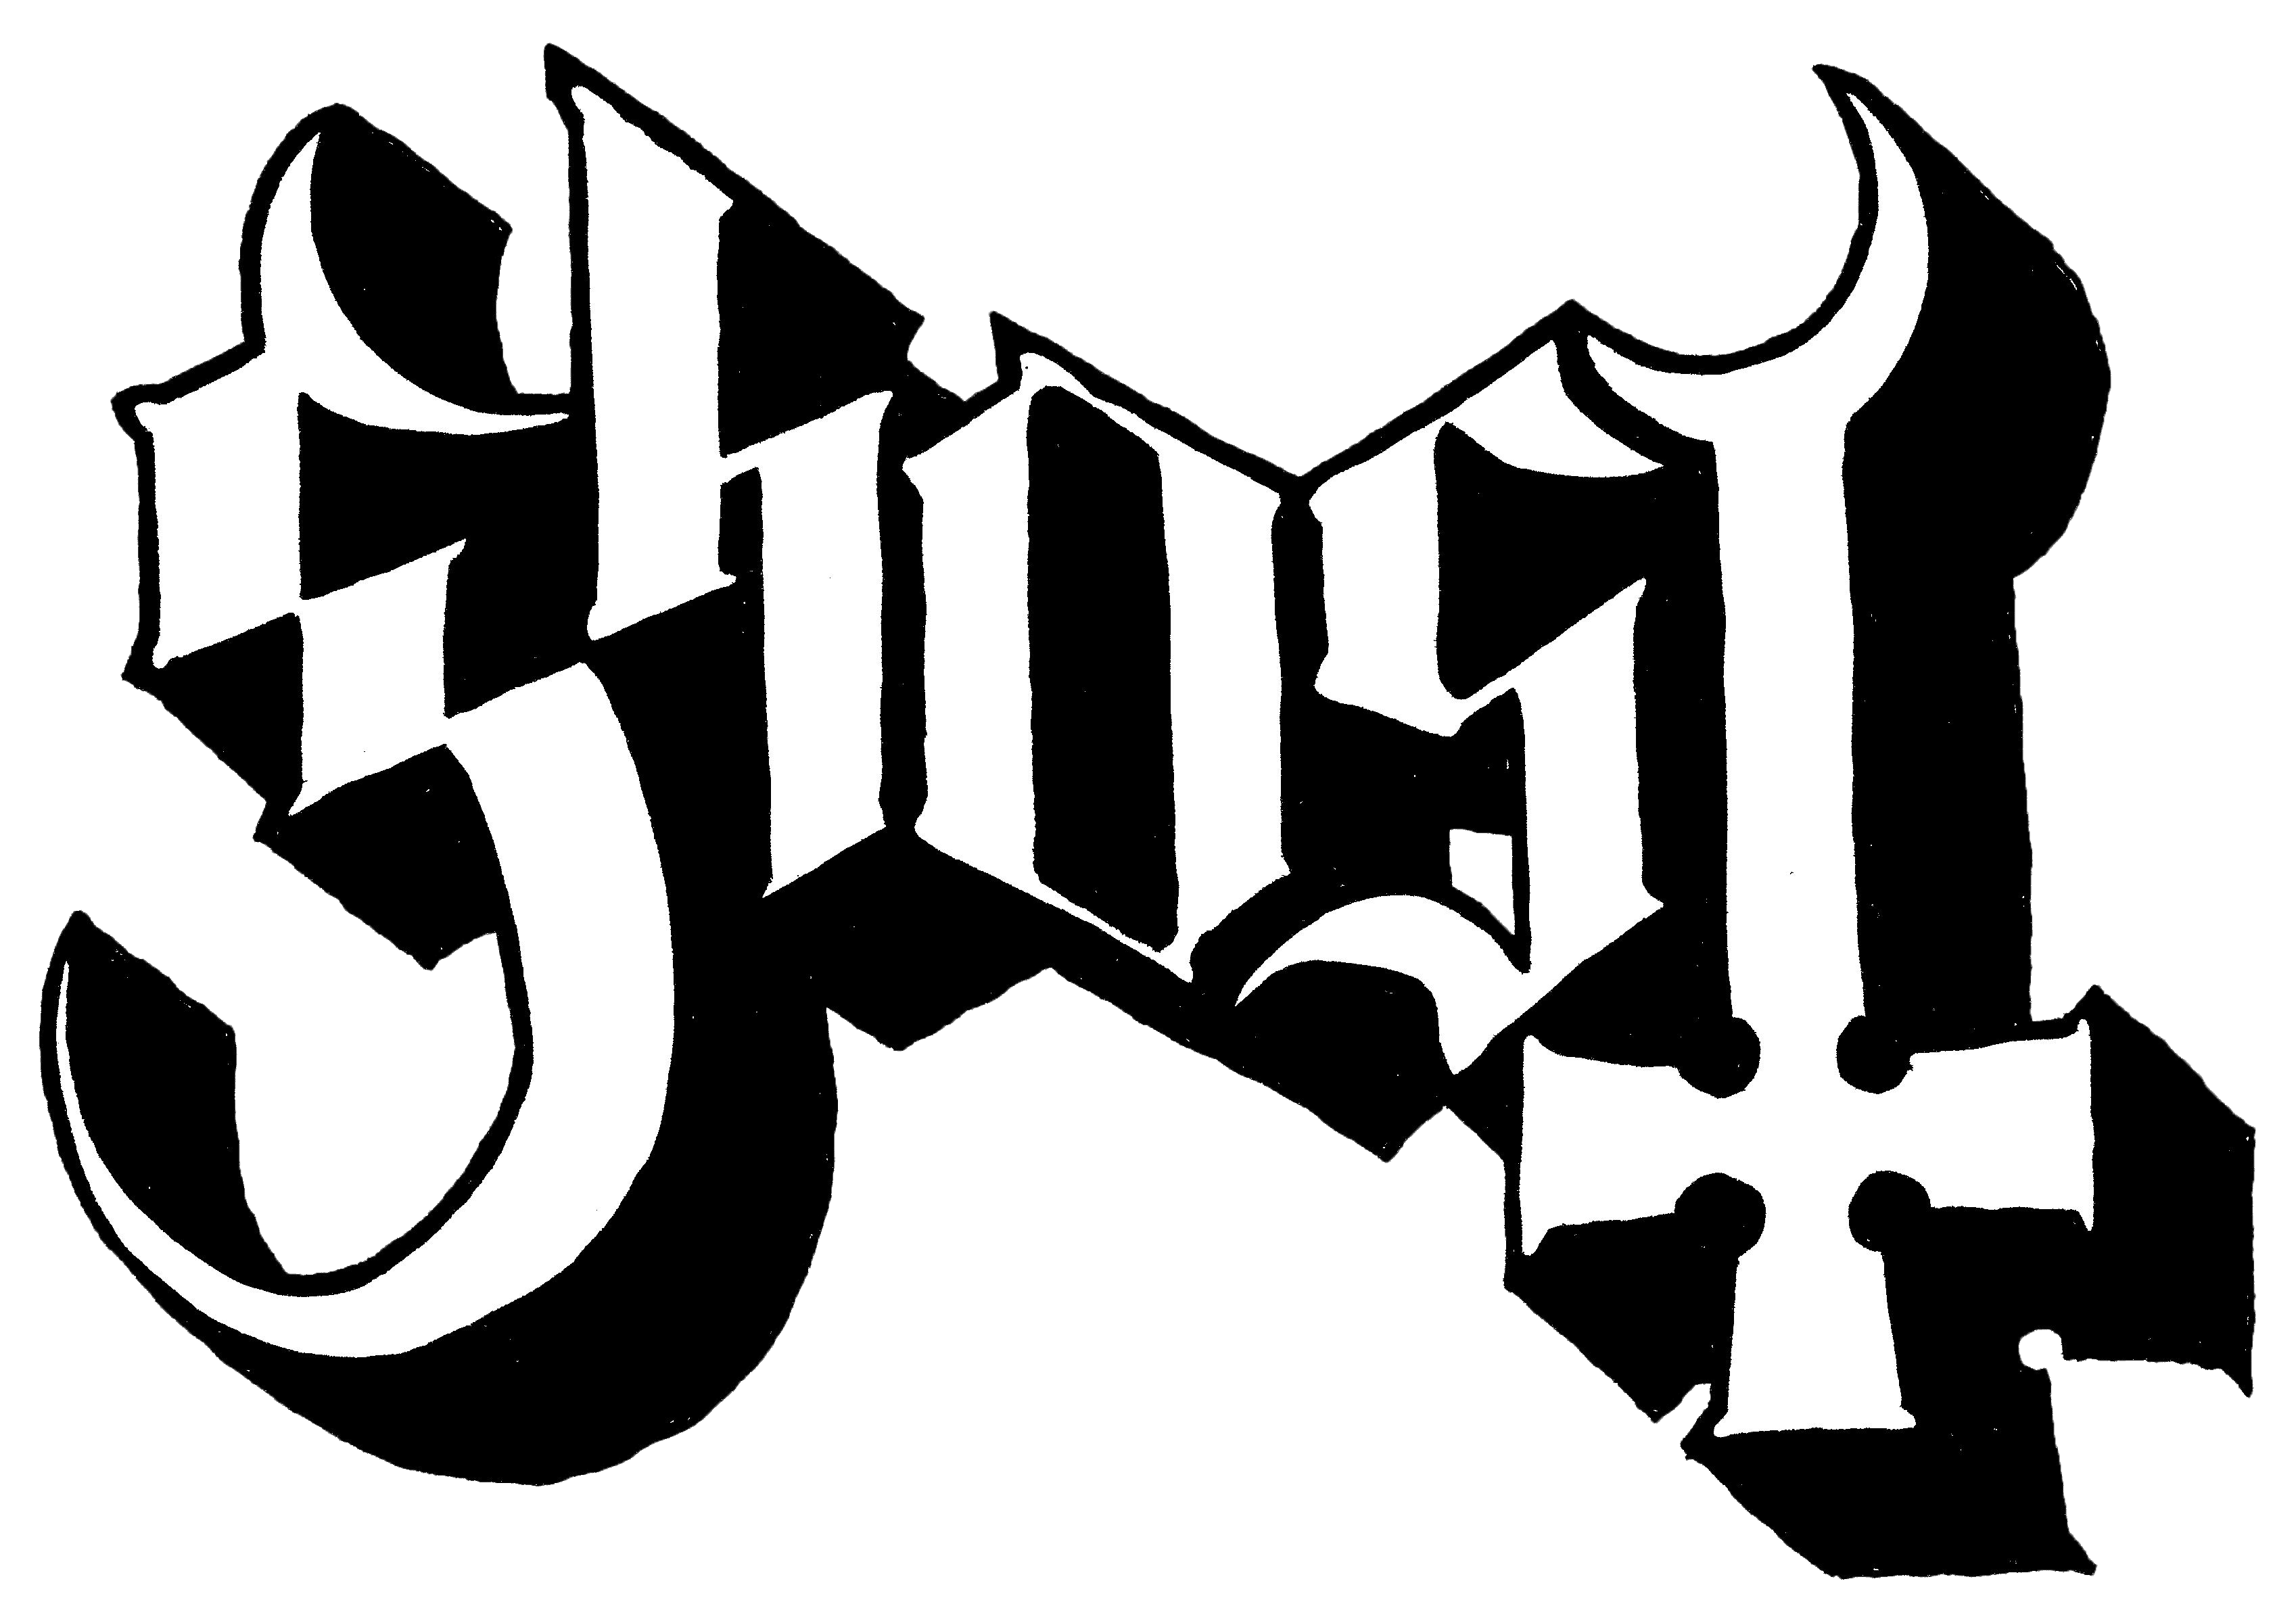 xxe5k5lcndrh_Ghost_logo_HiRes.png